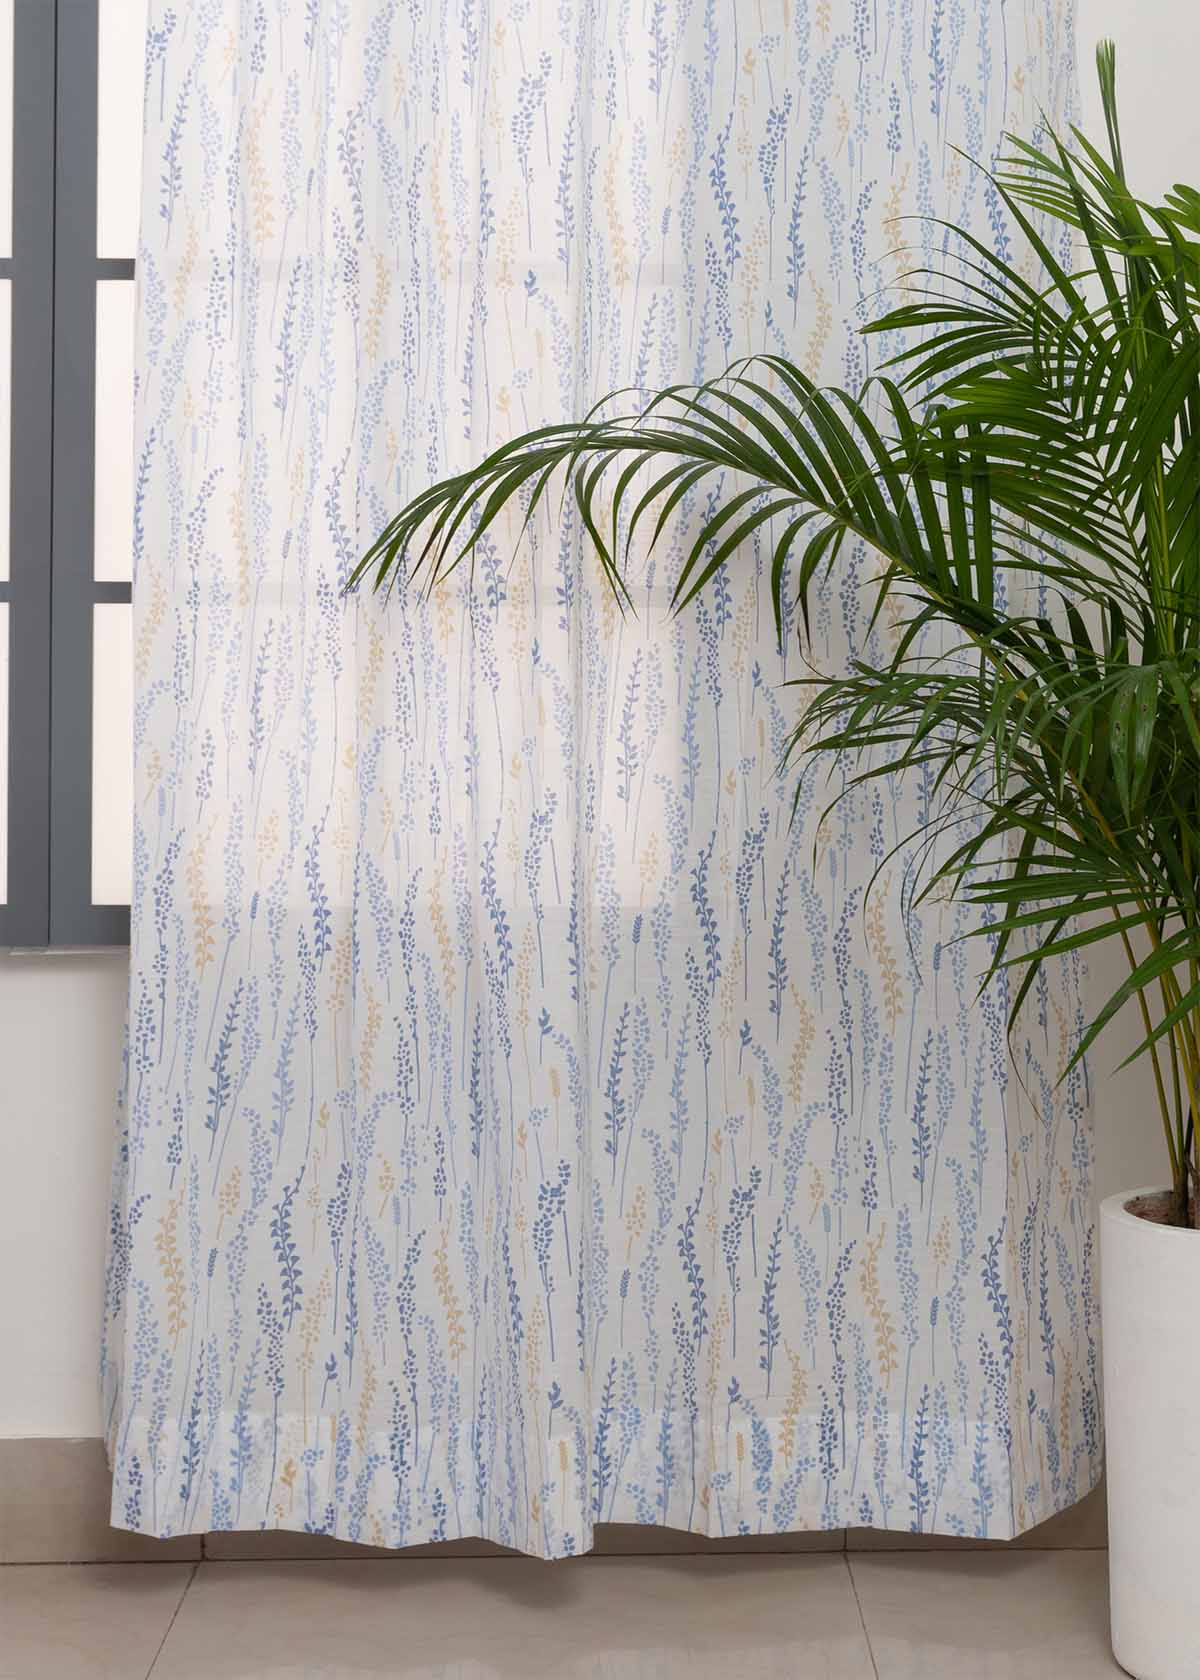 Grass fileds  100% Customizable Cotton sheer floral curtain for living room -  Light filtering - Blue